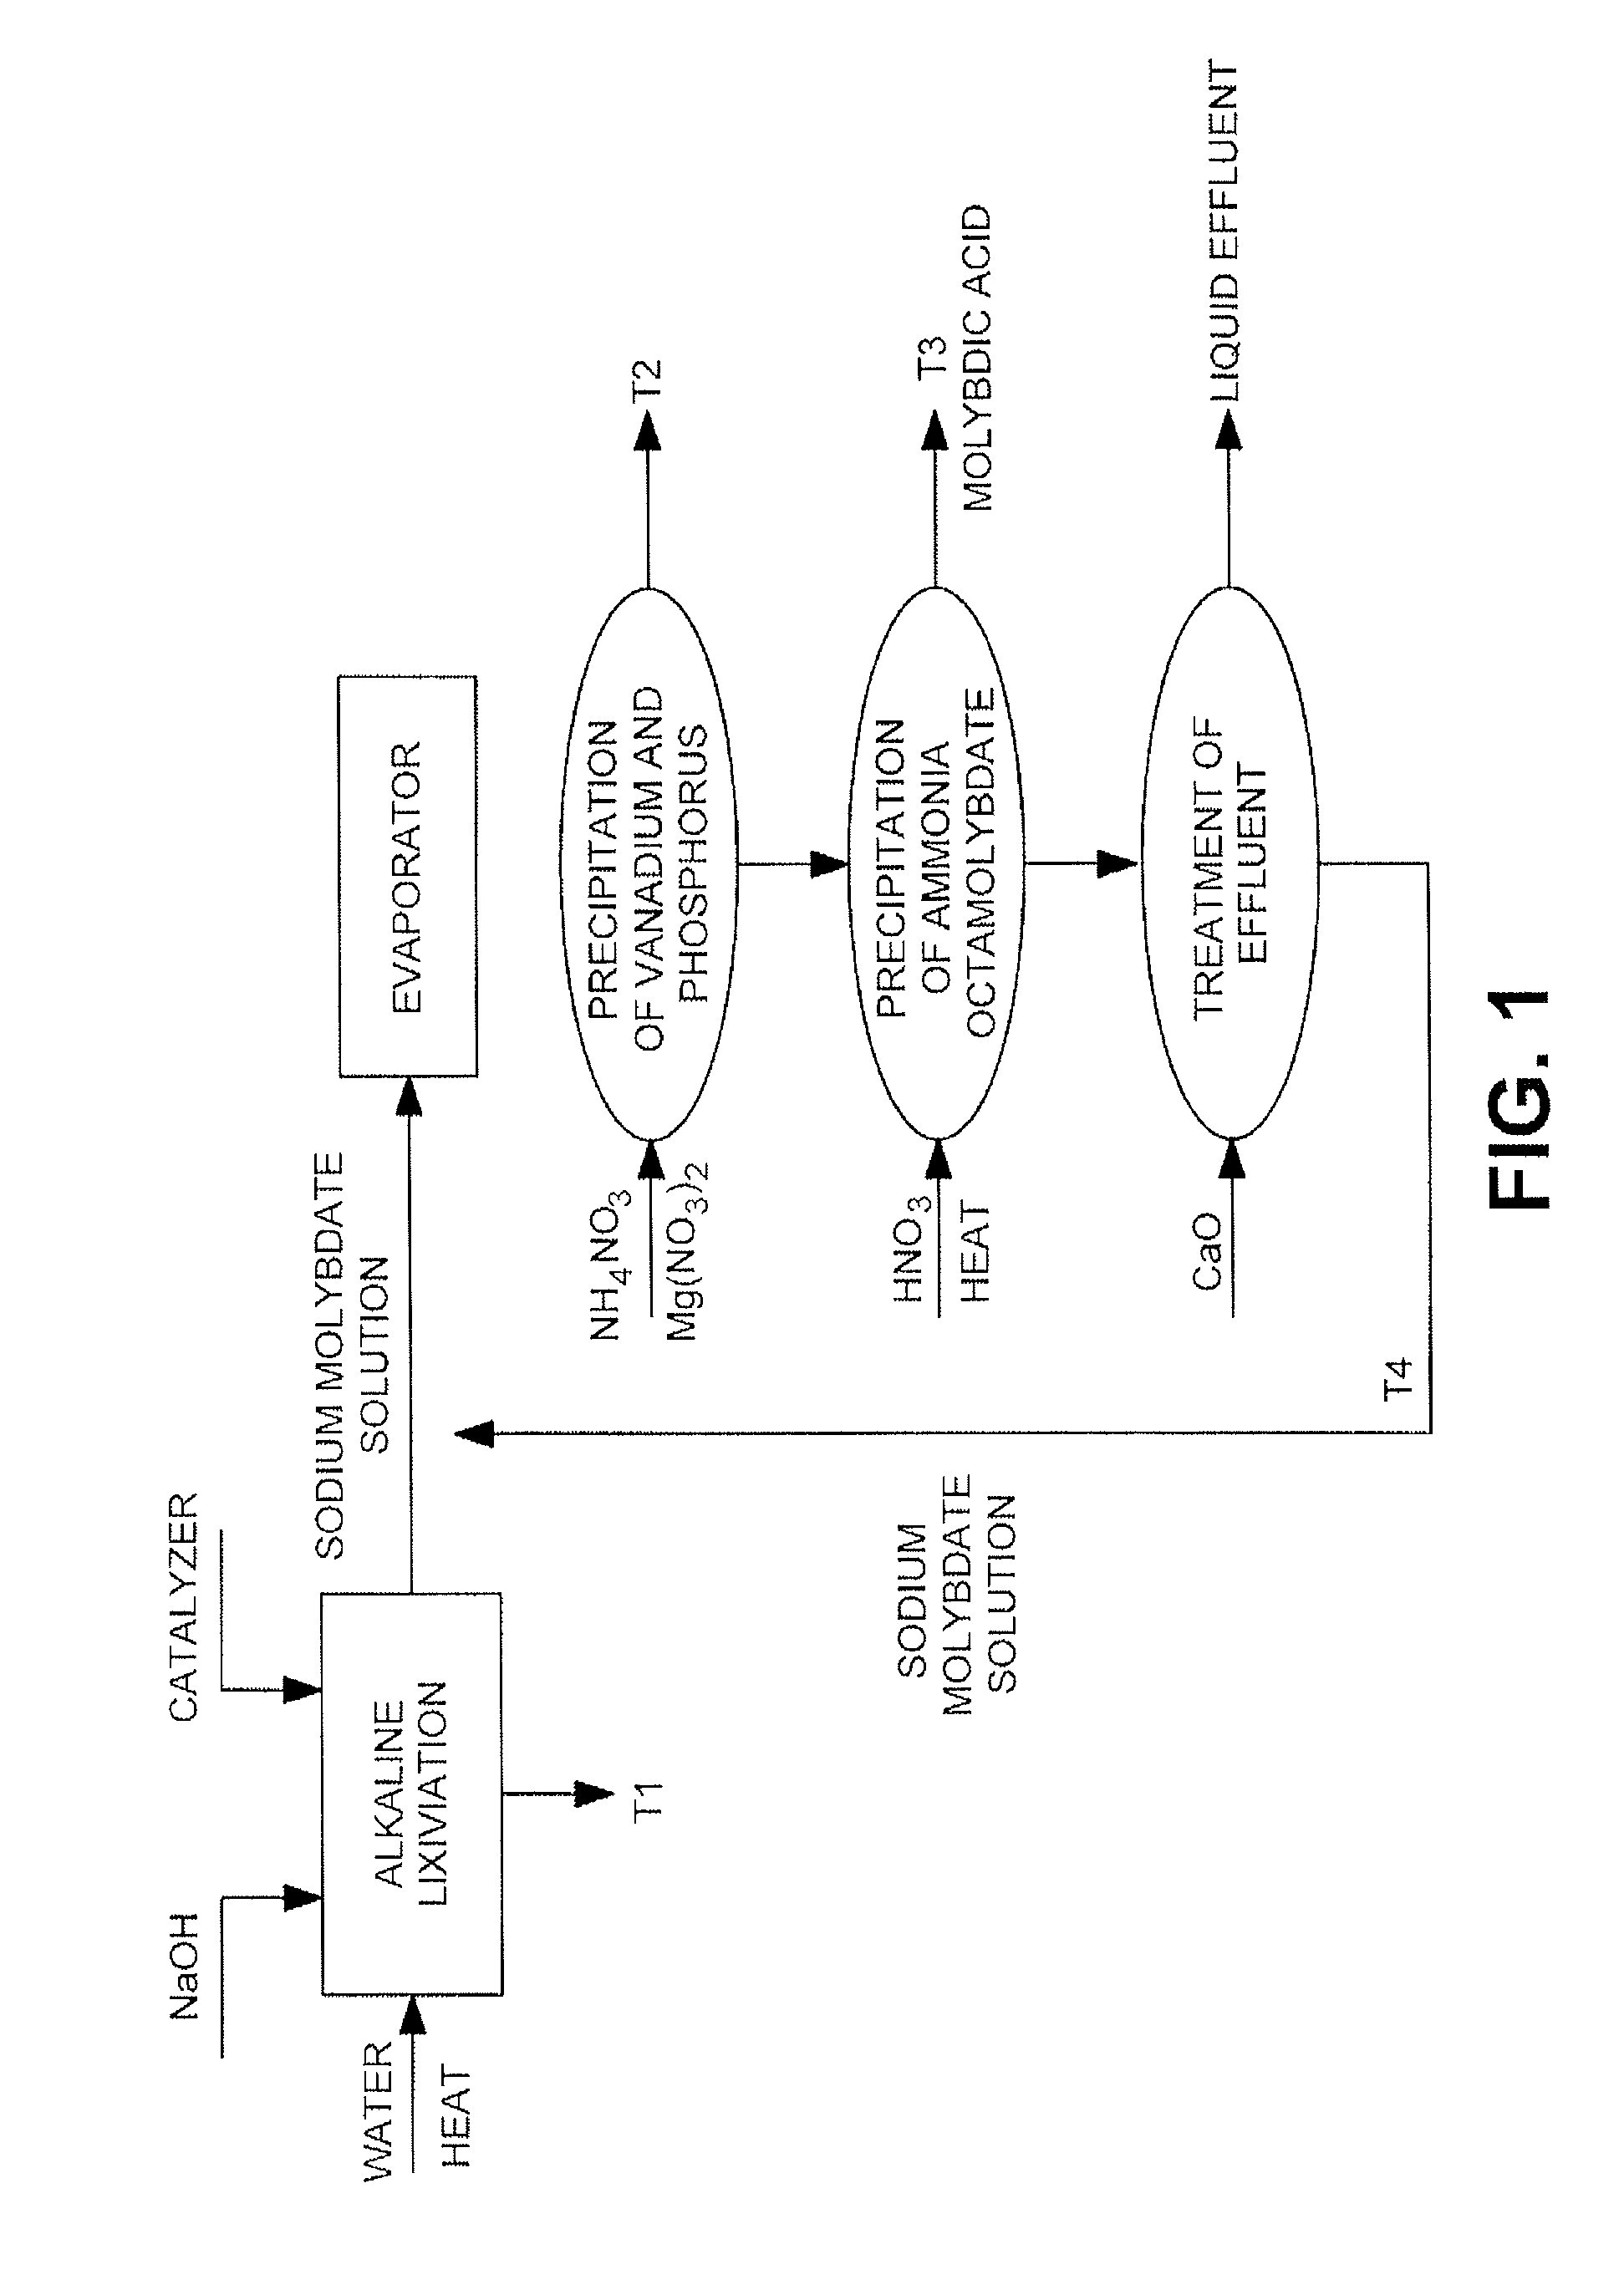 Process to produce molybdenum compounds, from spent molybdenum catalyzers, industrial residues and metal alloys